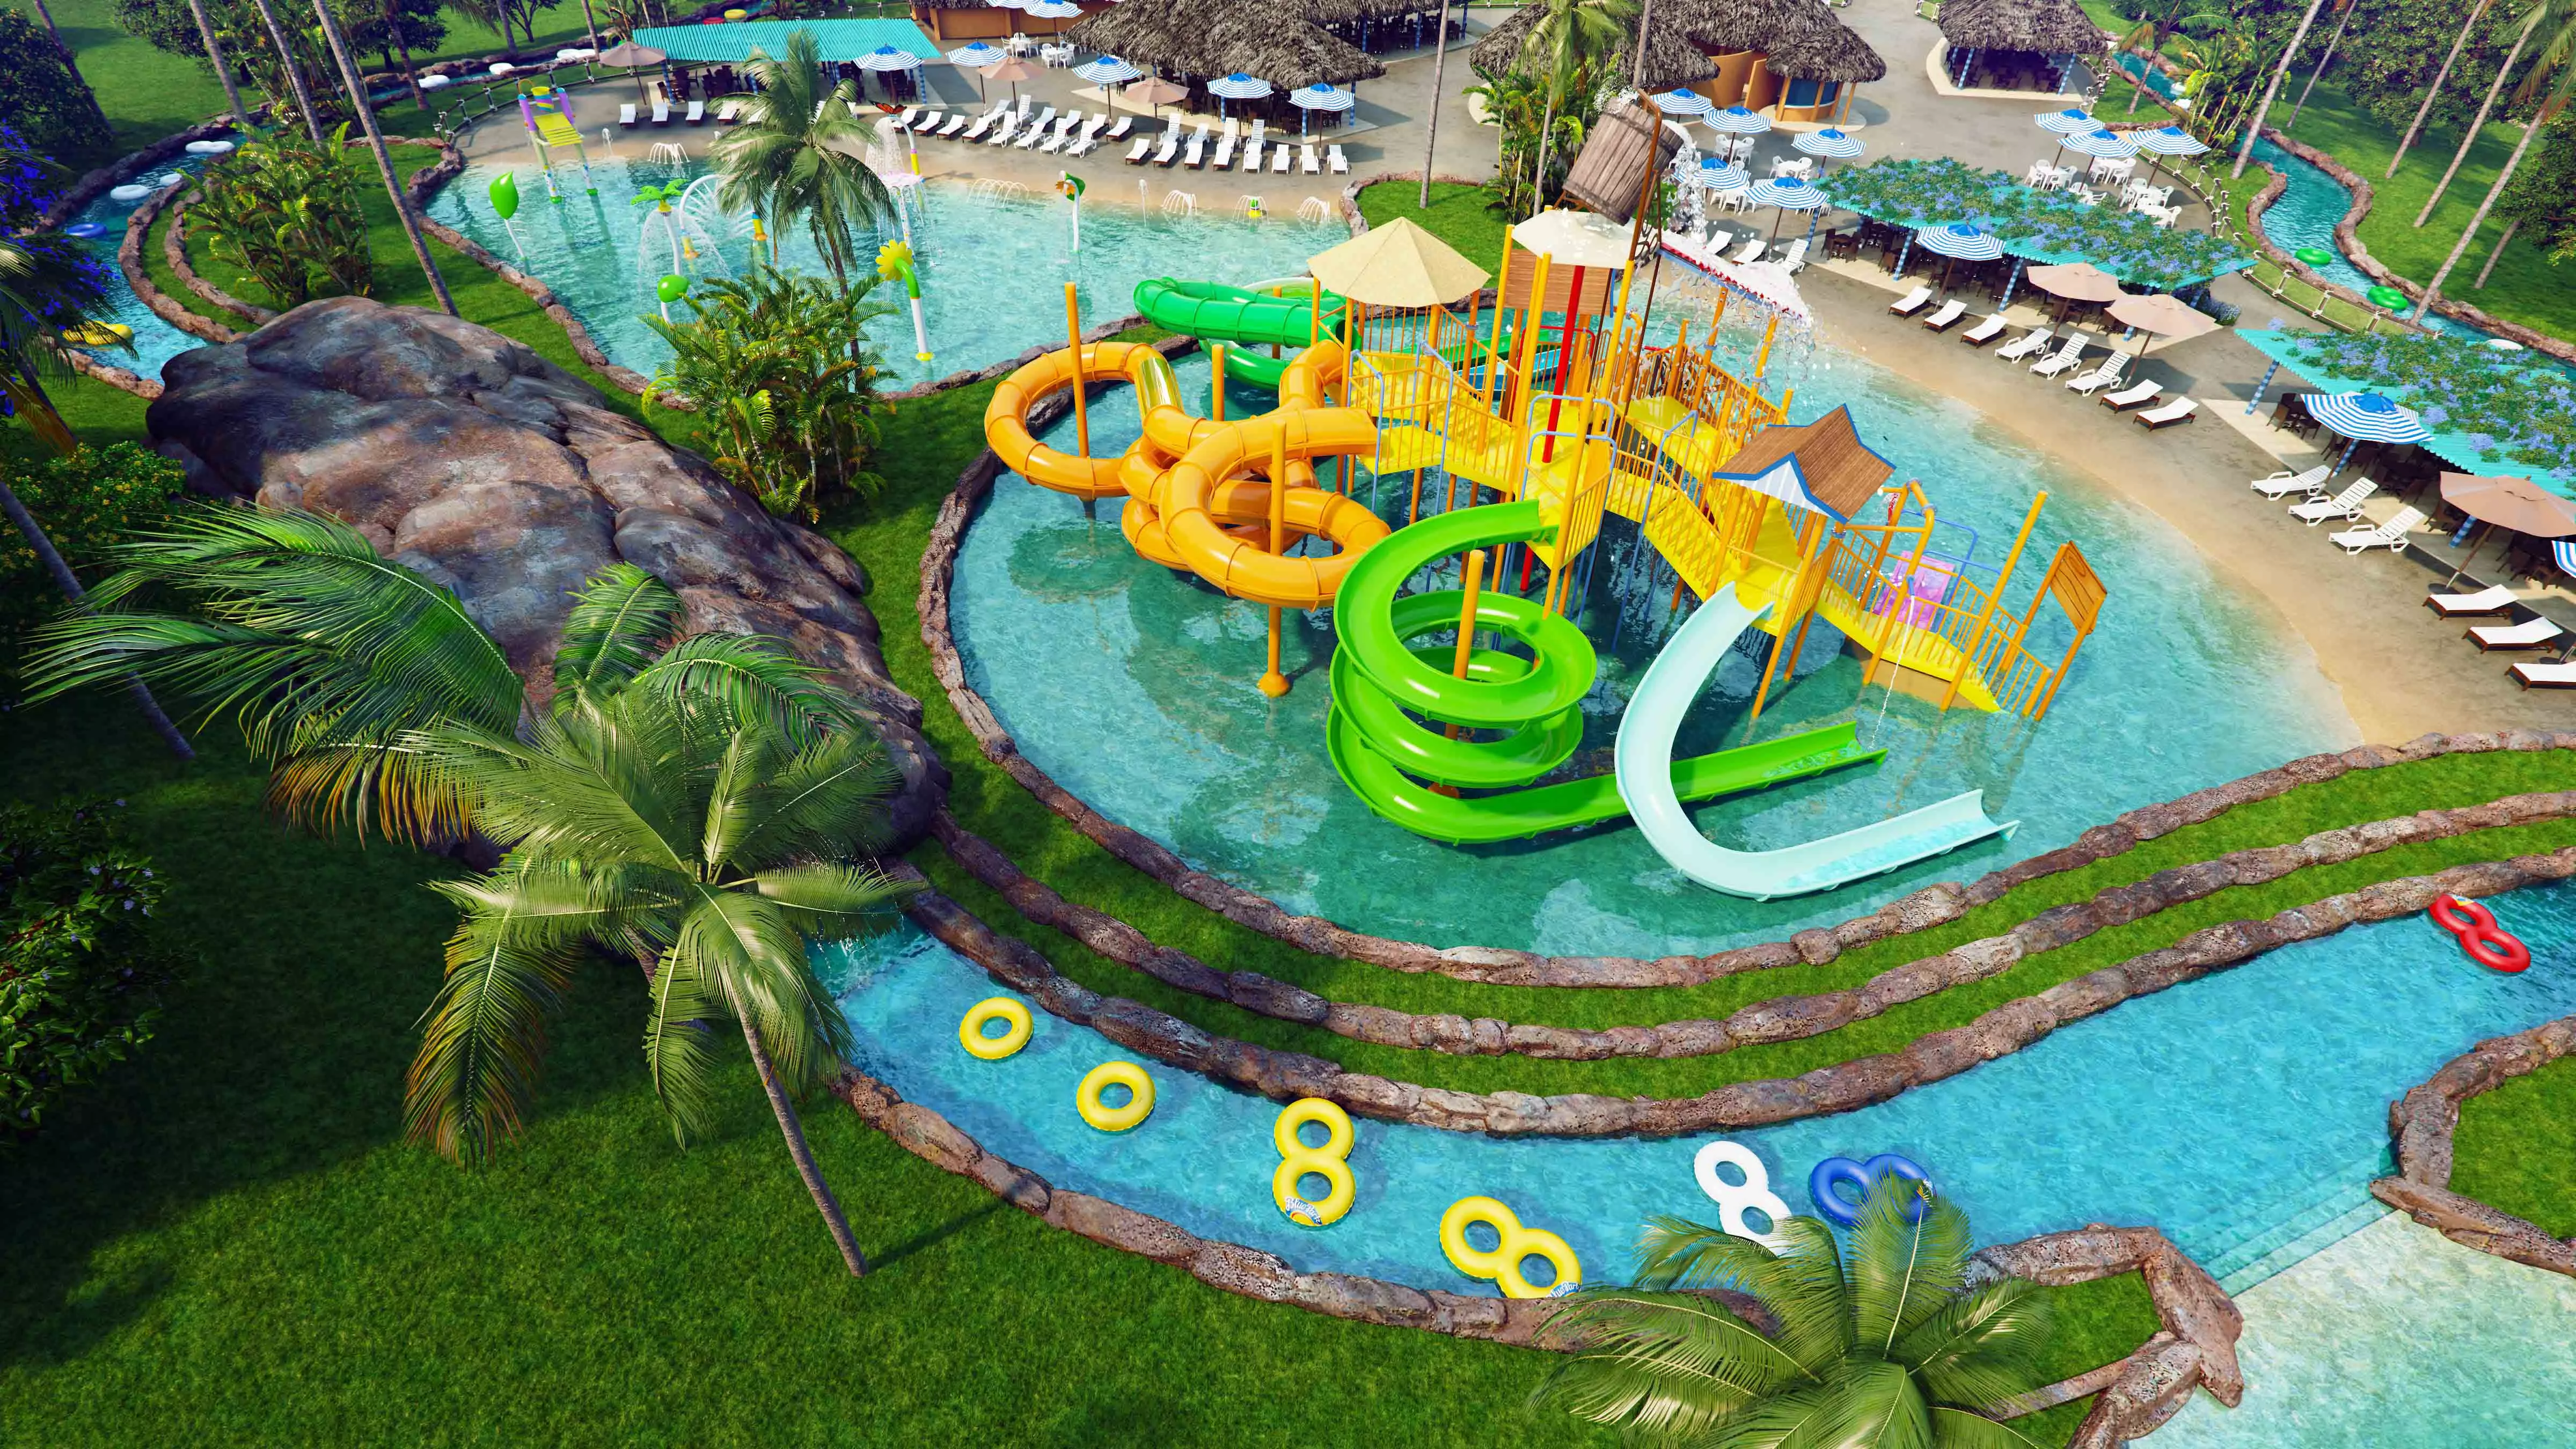 Blue Park Foz in Brazil, South America | Water Parks - Rated 3.6